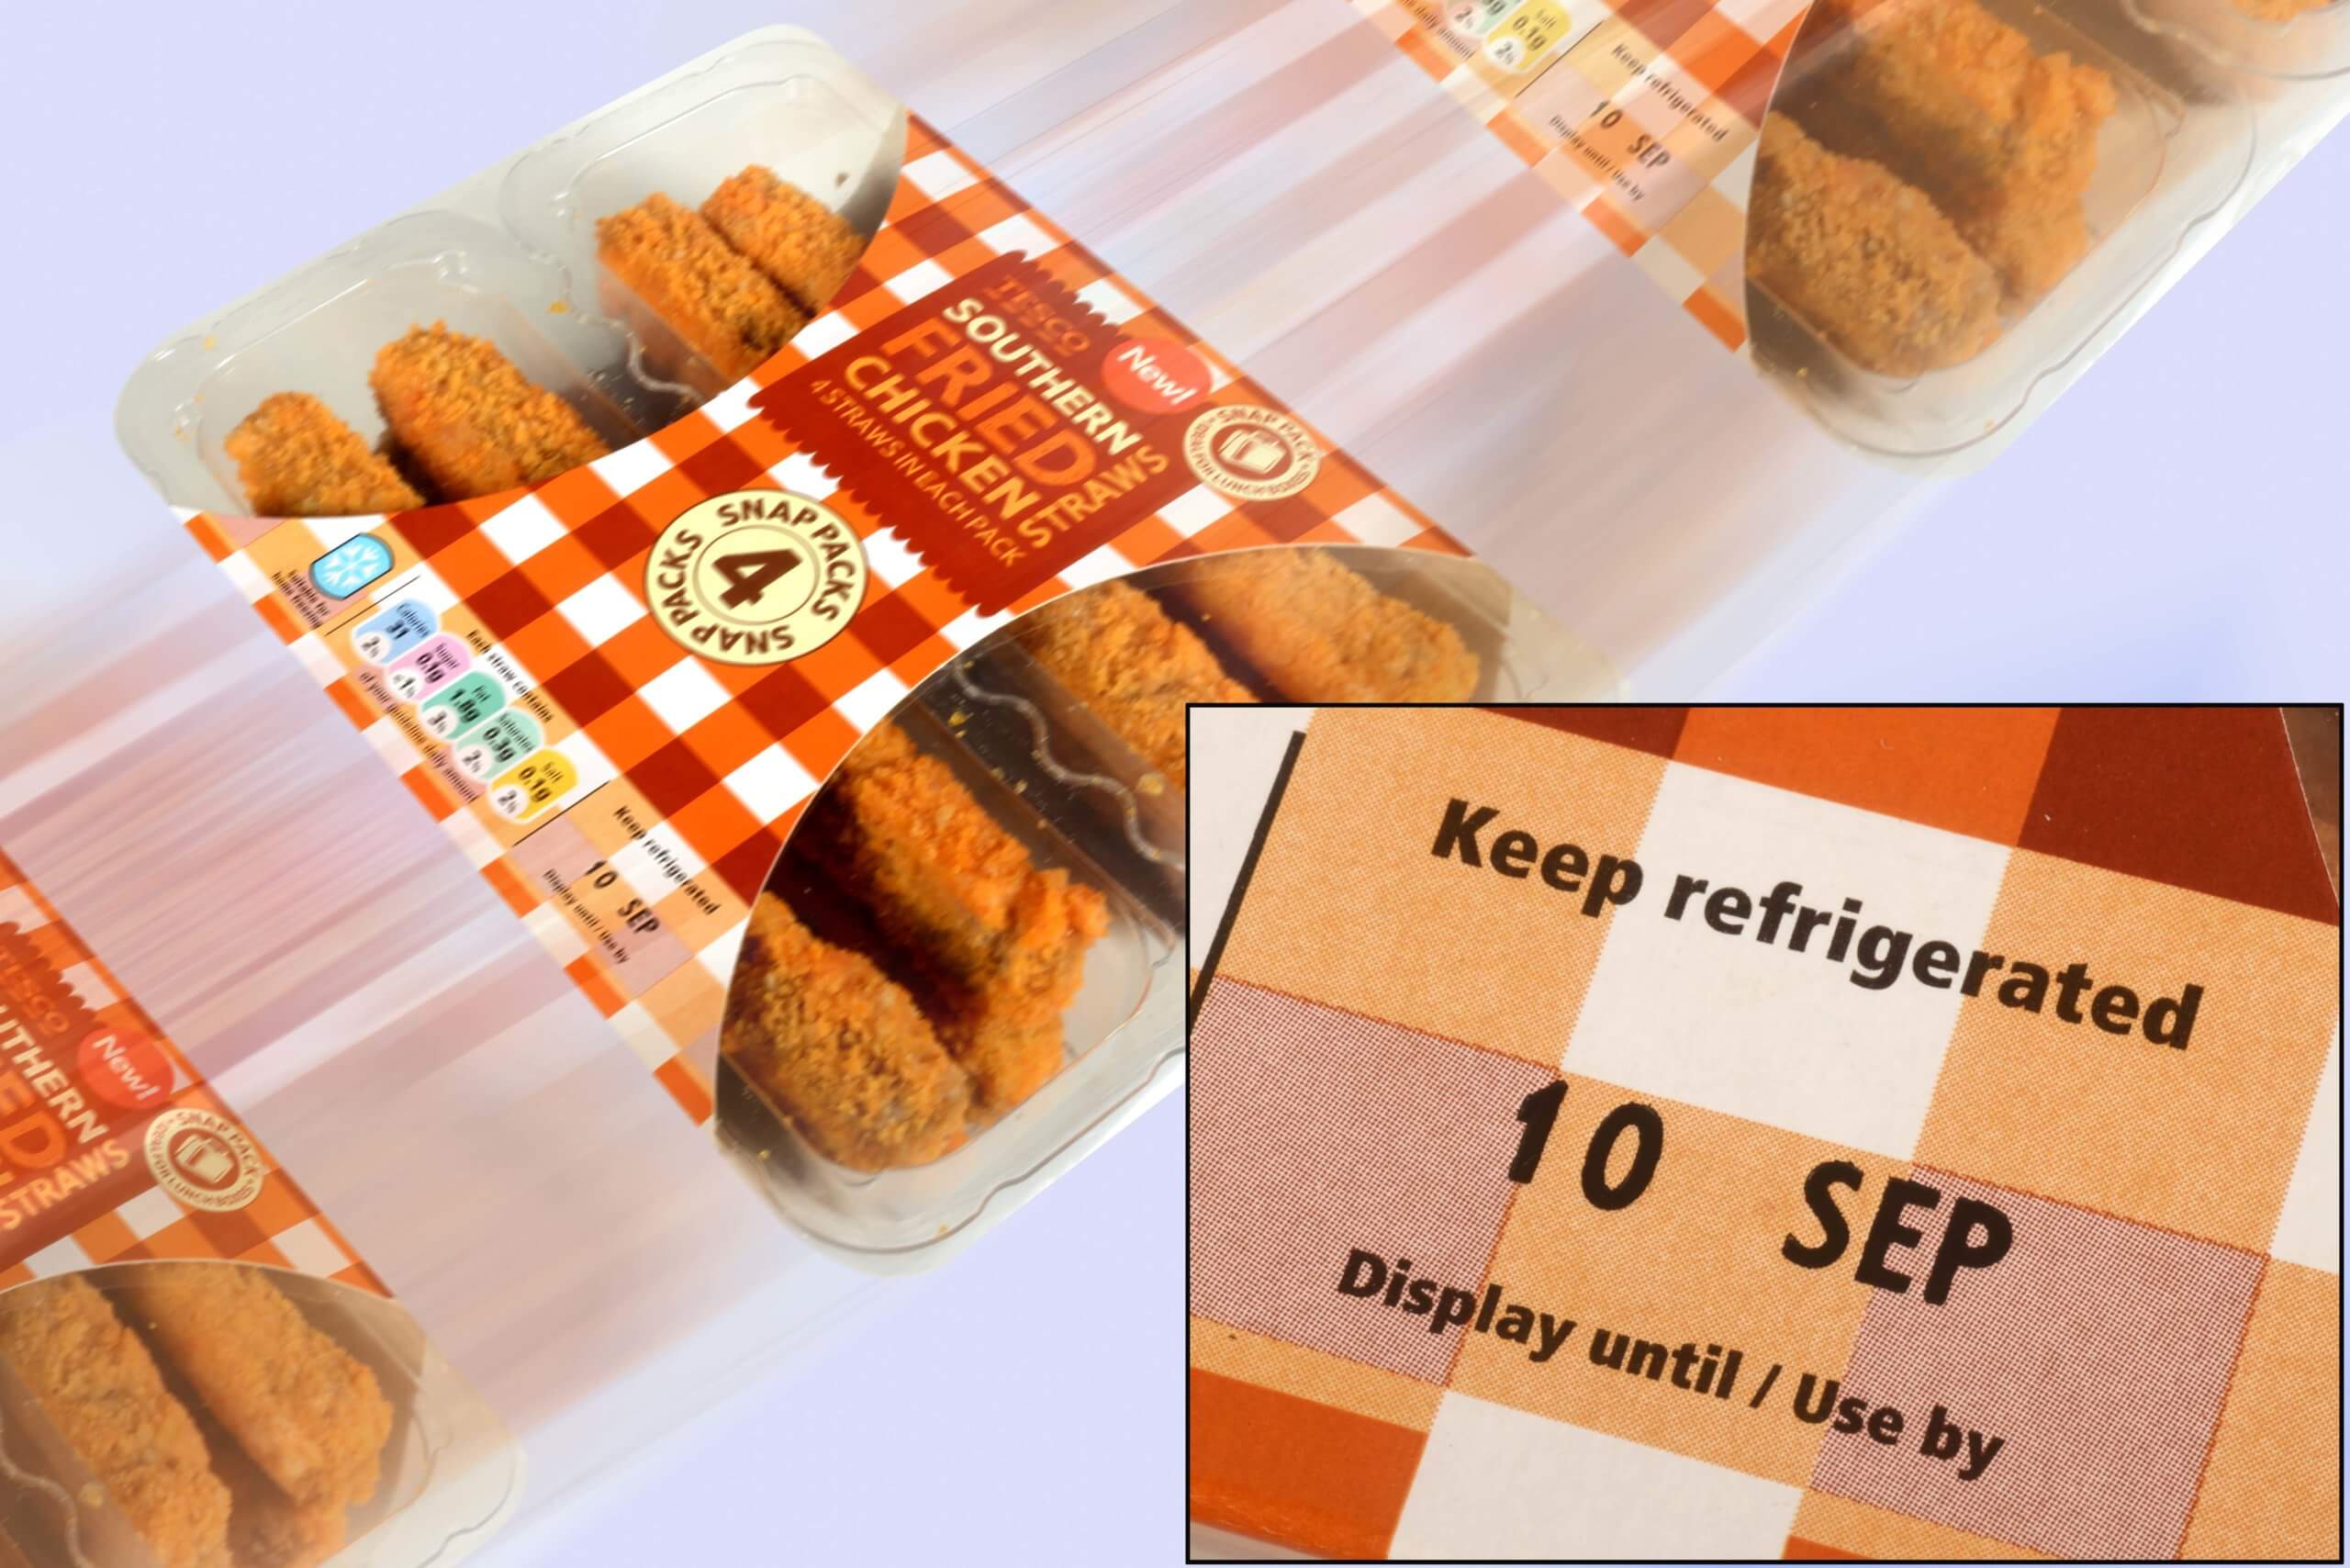 Precise label printing on food containers for compliance